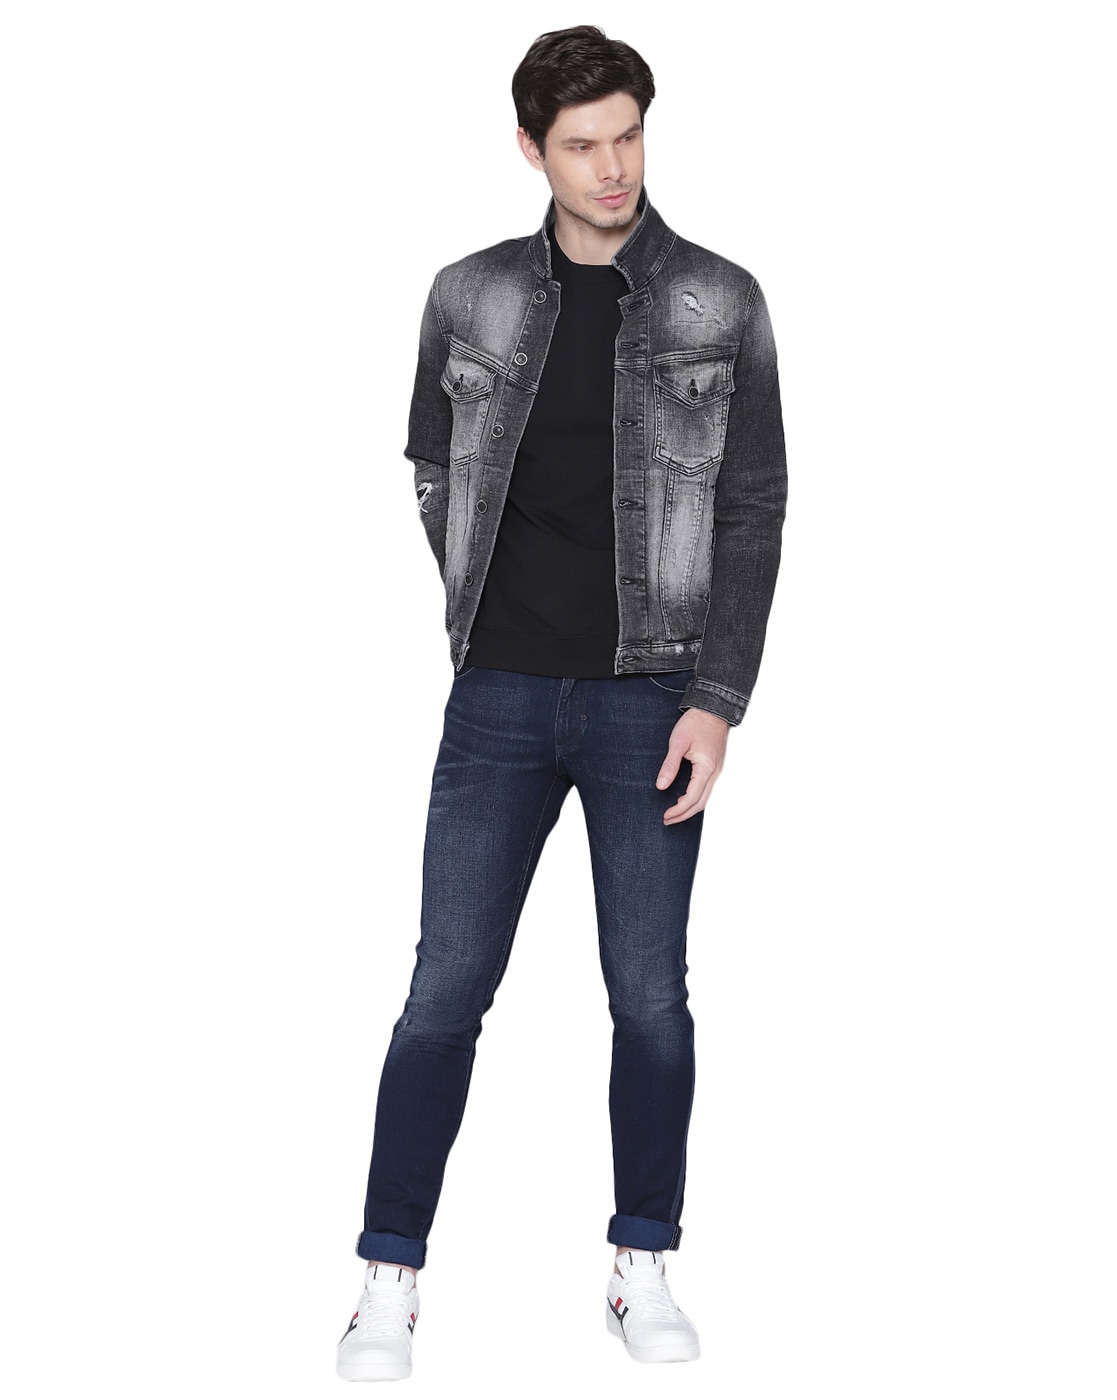 Buy RAW BLUE Jackets & Coats for Men by STYLE QUOTIENT Online | Ajio.com